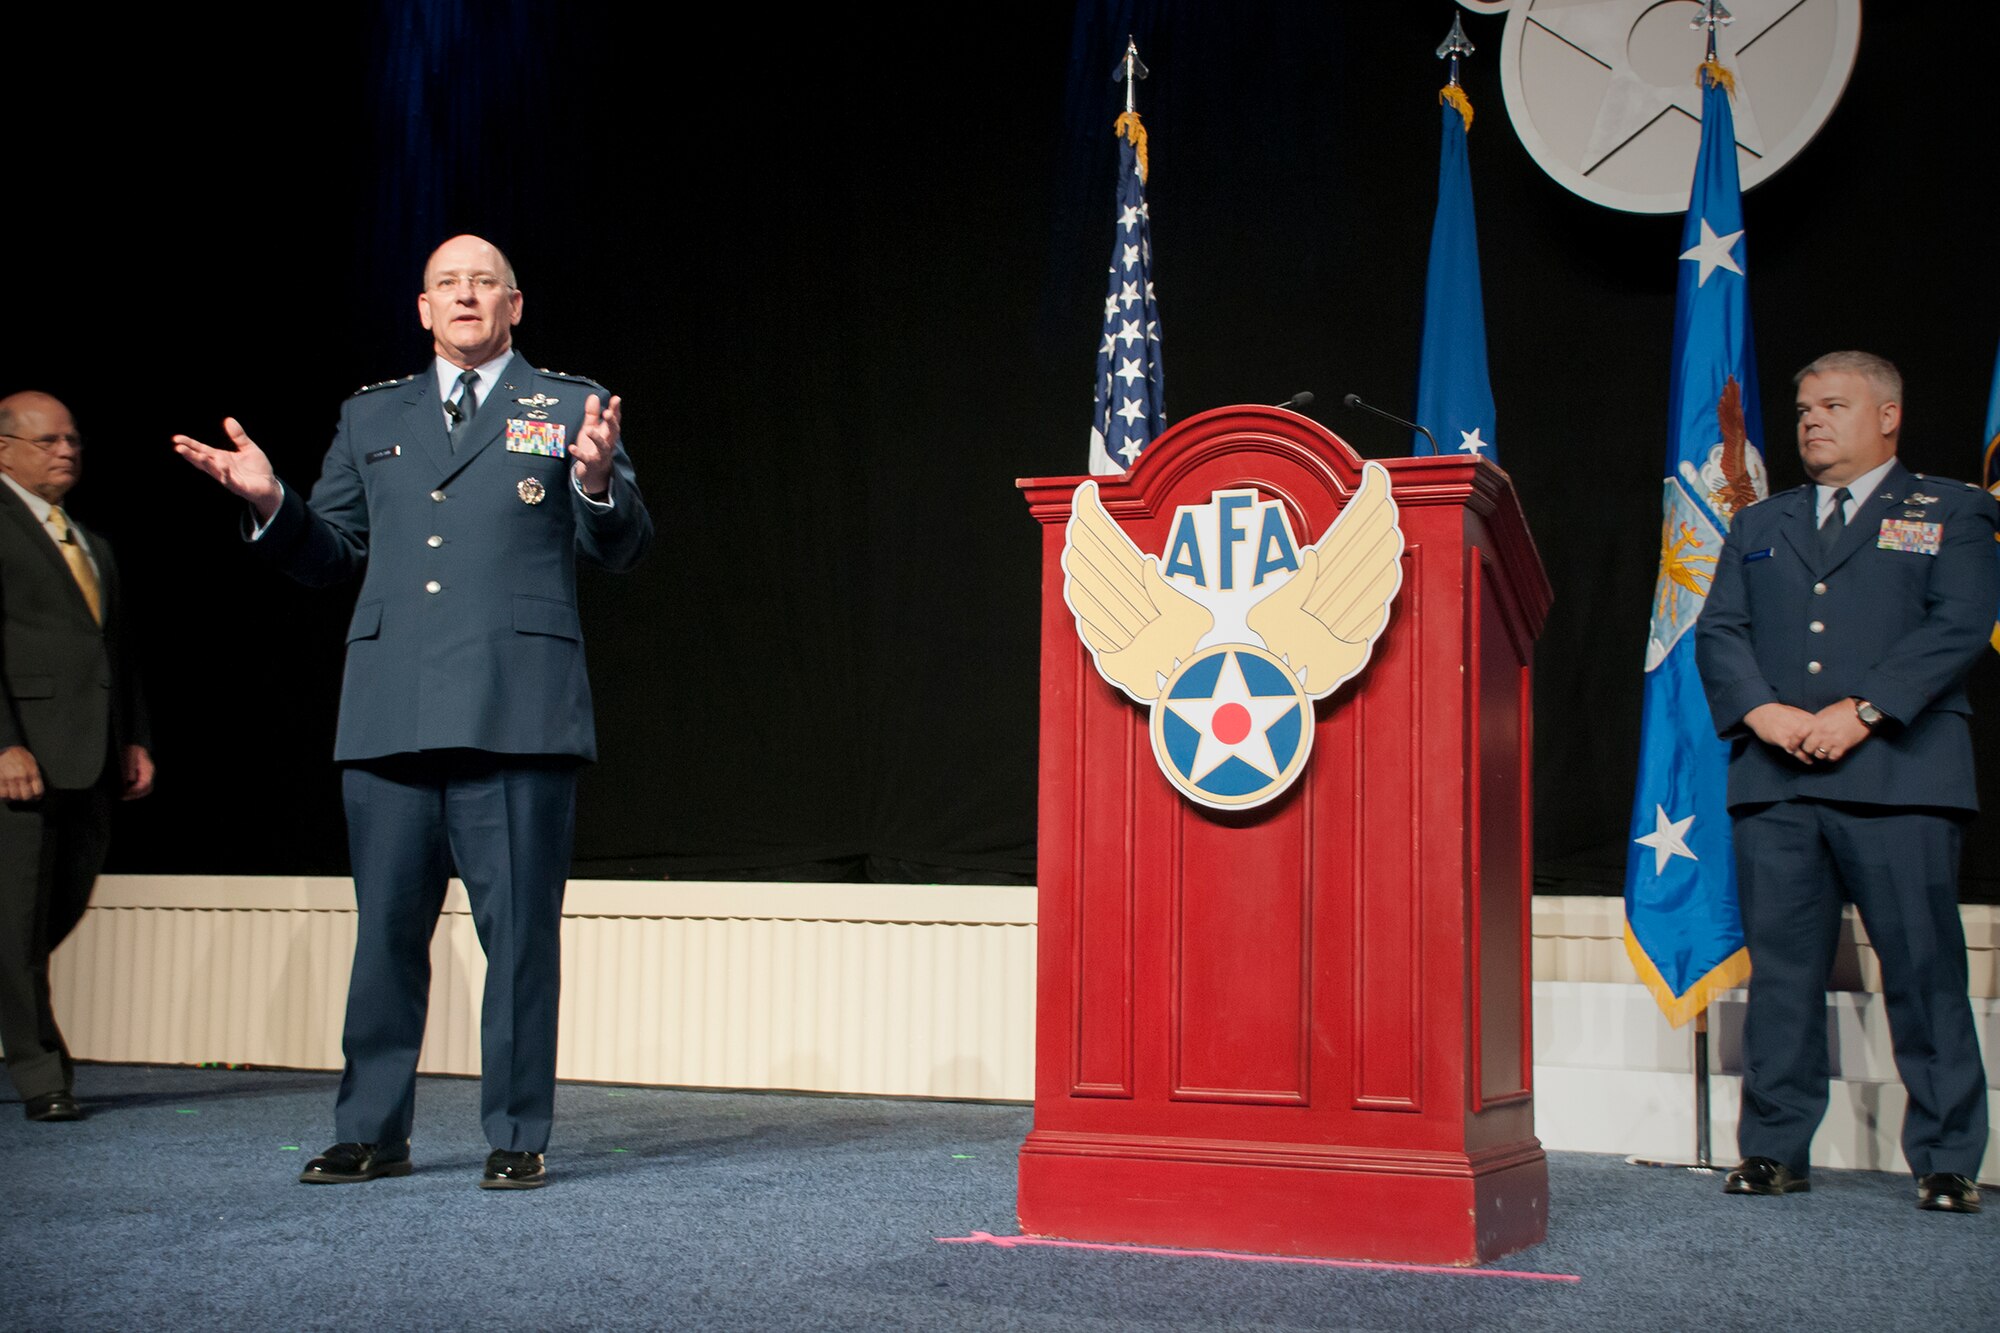 Lt. Gen. James "JJ" Jackson, commander of the Air Force Reserve Command, gives remarks during the unveiling ceremony of the painting “That Others May Live” during the Air Force Association Air and Space Conference and Technology Exposition, Washington D.C., Sept. 14, 2015. “That Others May Live” documents the rescue of Marcus Luttrell, a U.S. Navy SEAL, in June 2005 by reservists from the 920th Rescue Wing, Patrick Air Force Base, Fla. The well-known rescue was dramatized in the movie“The Lone Survivor.” (U.S. Air Force photo/Staff Sgt. Kat Justen)